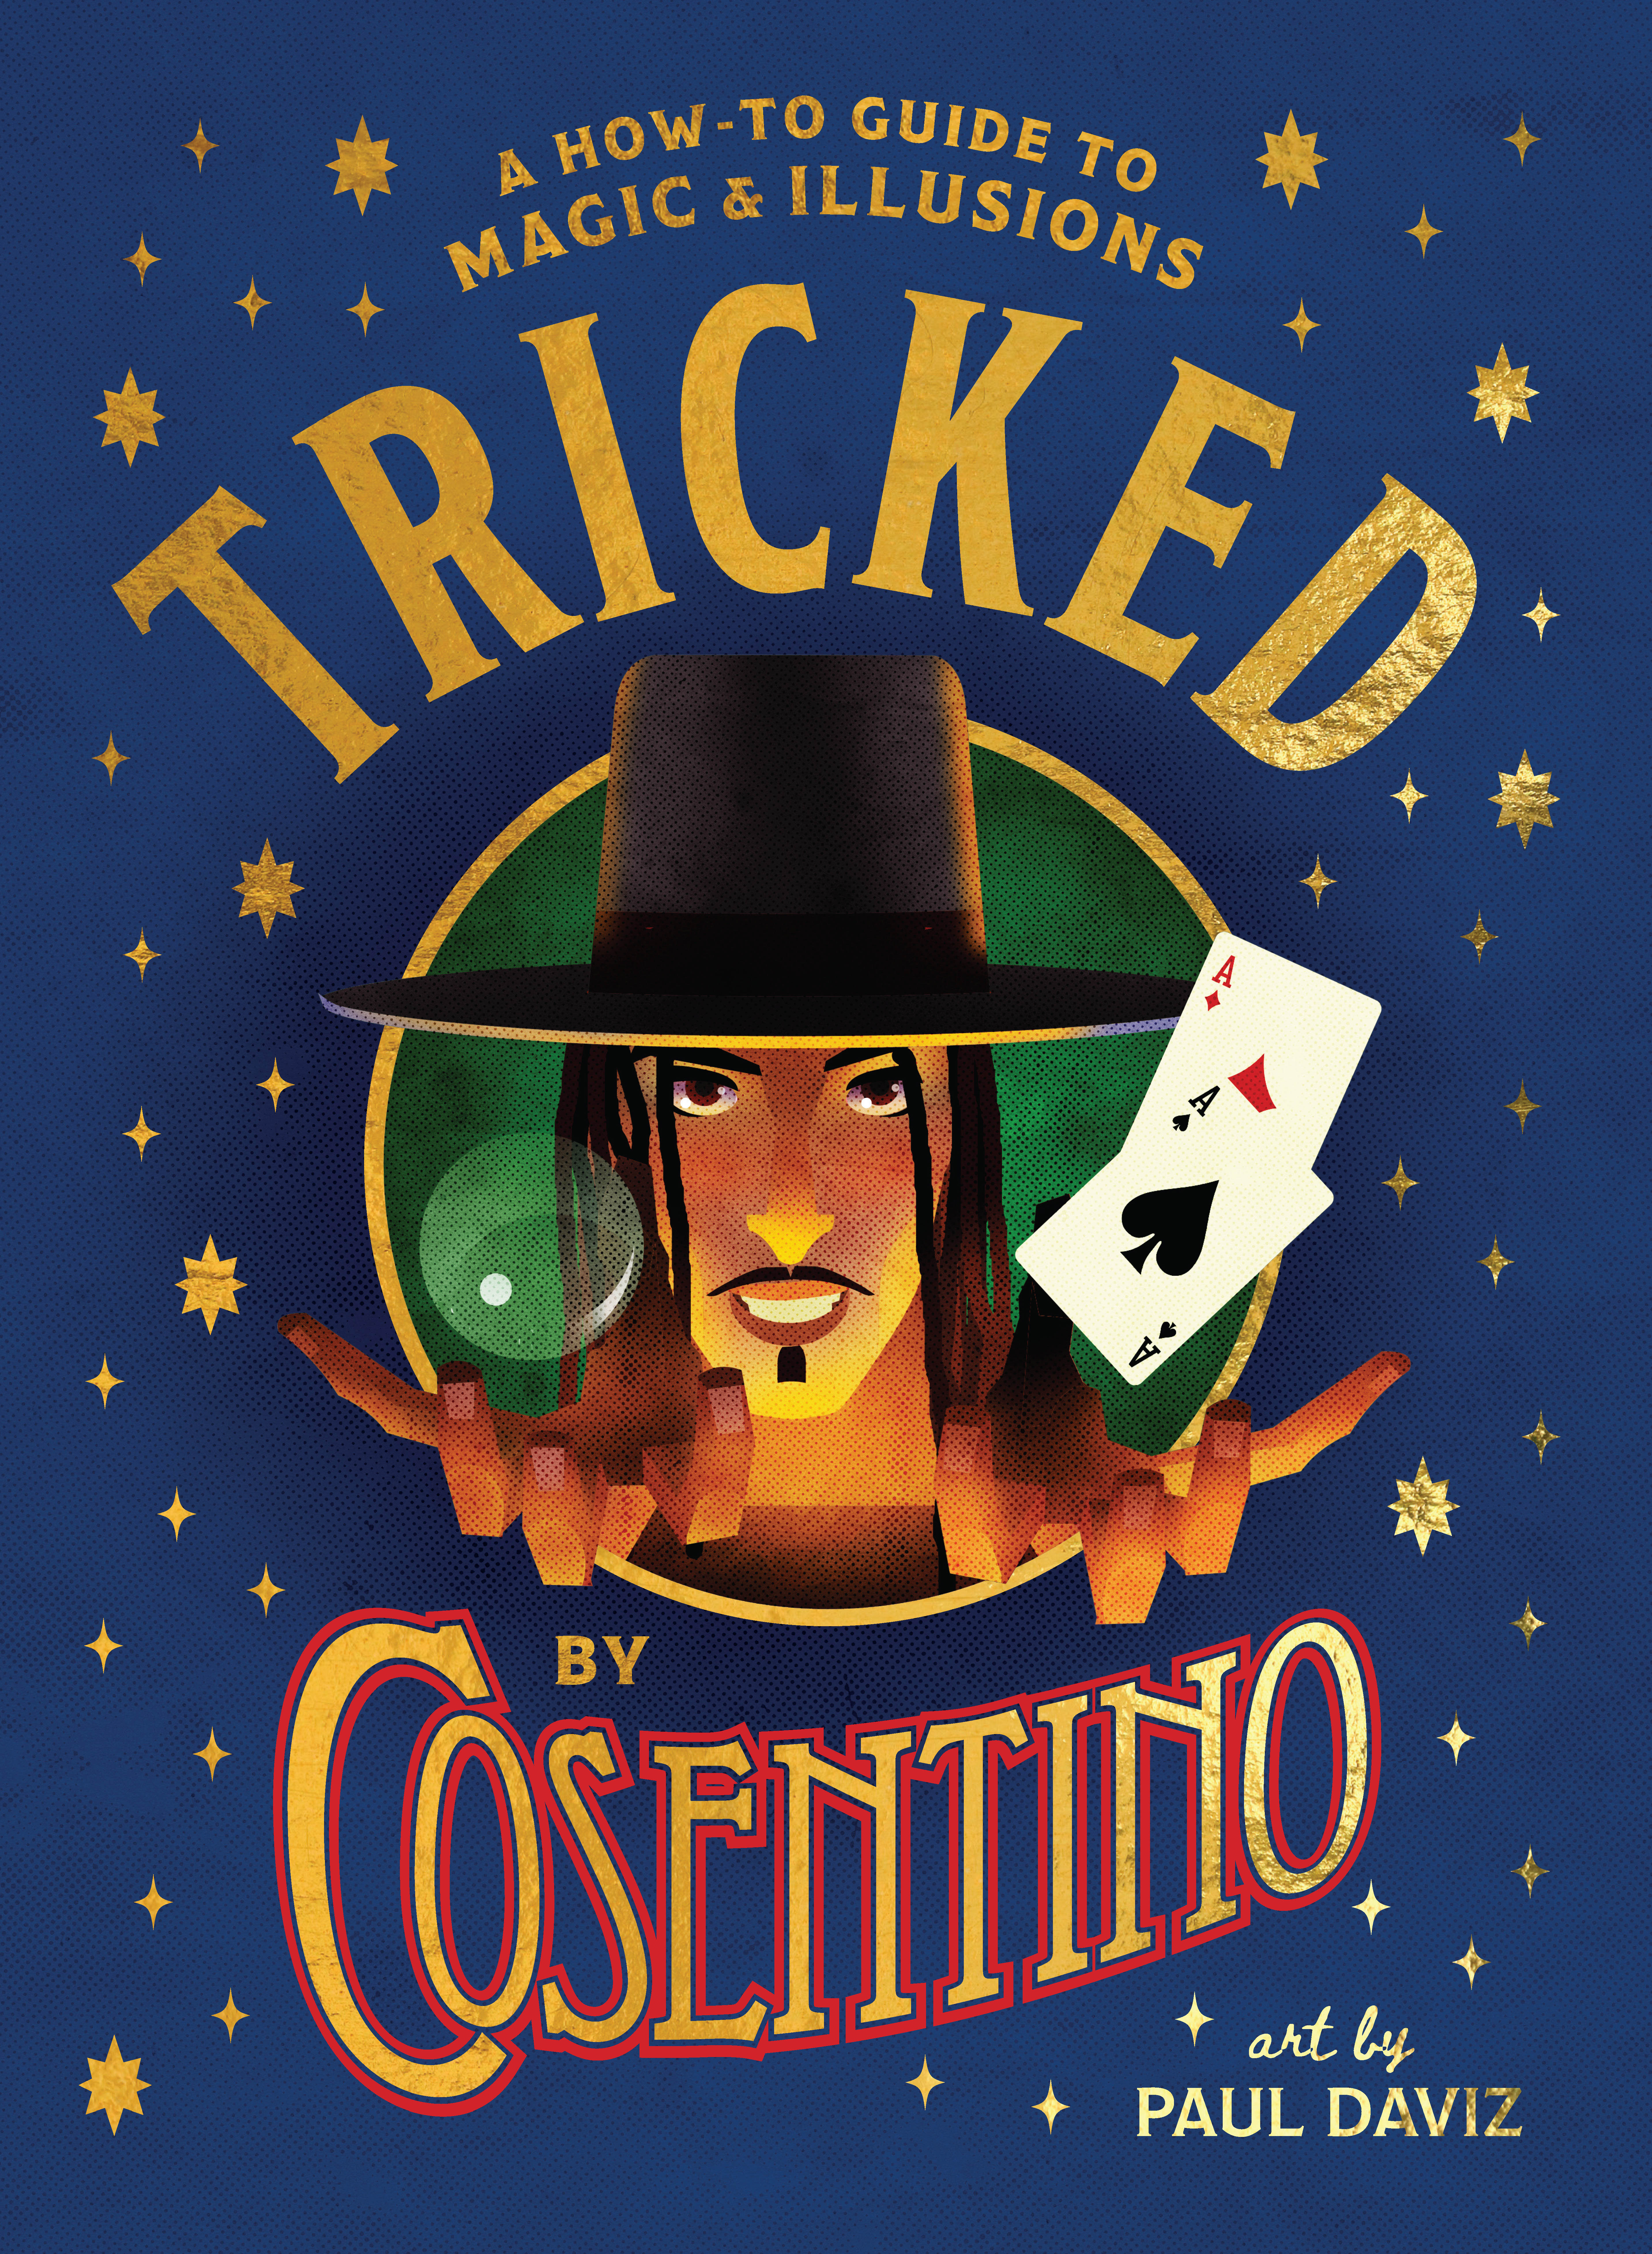 Tricked: A How-To Guide to Magic and Illusions